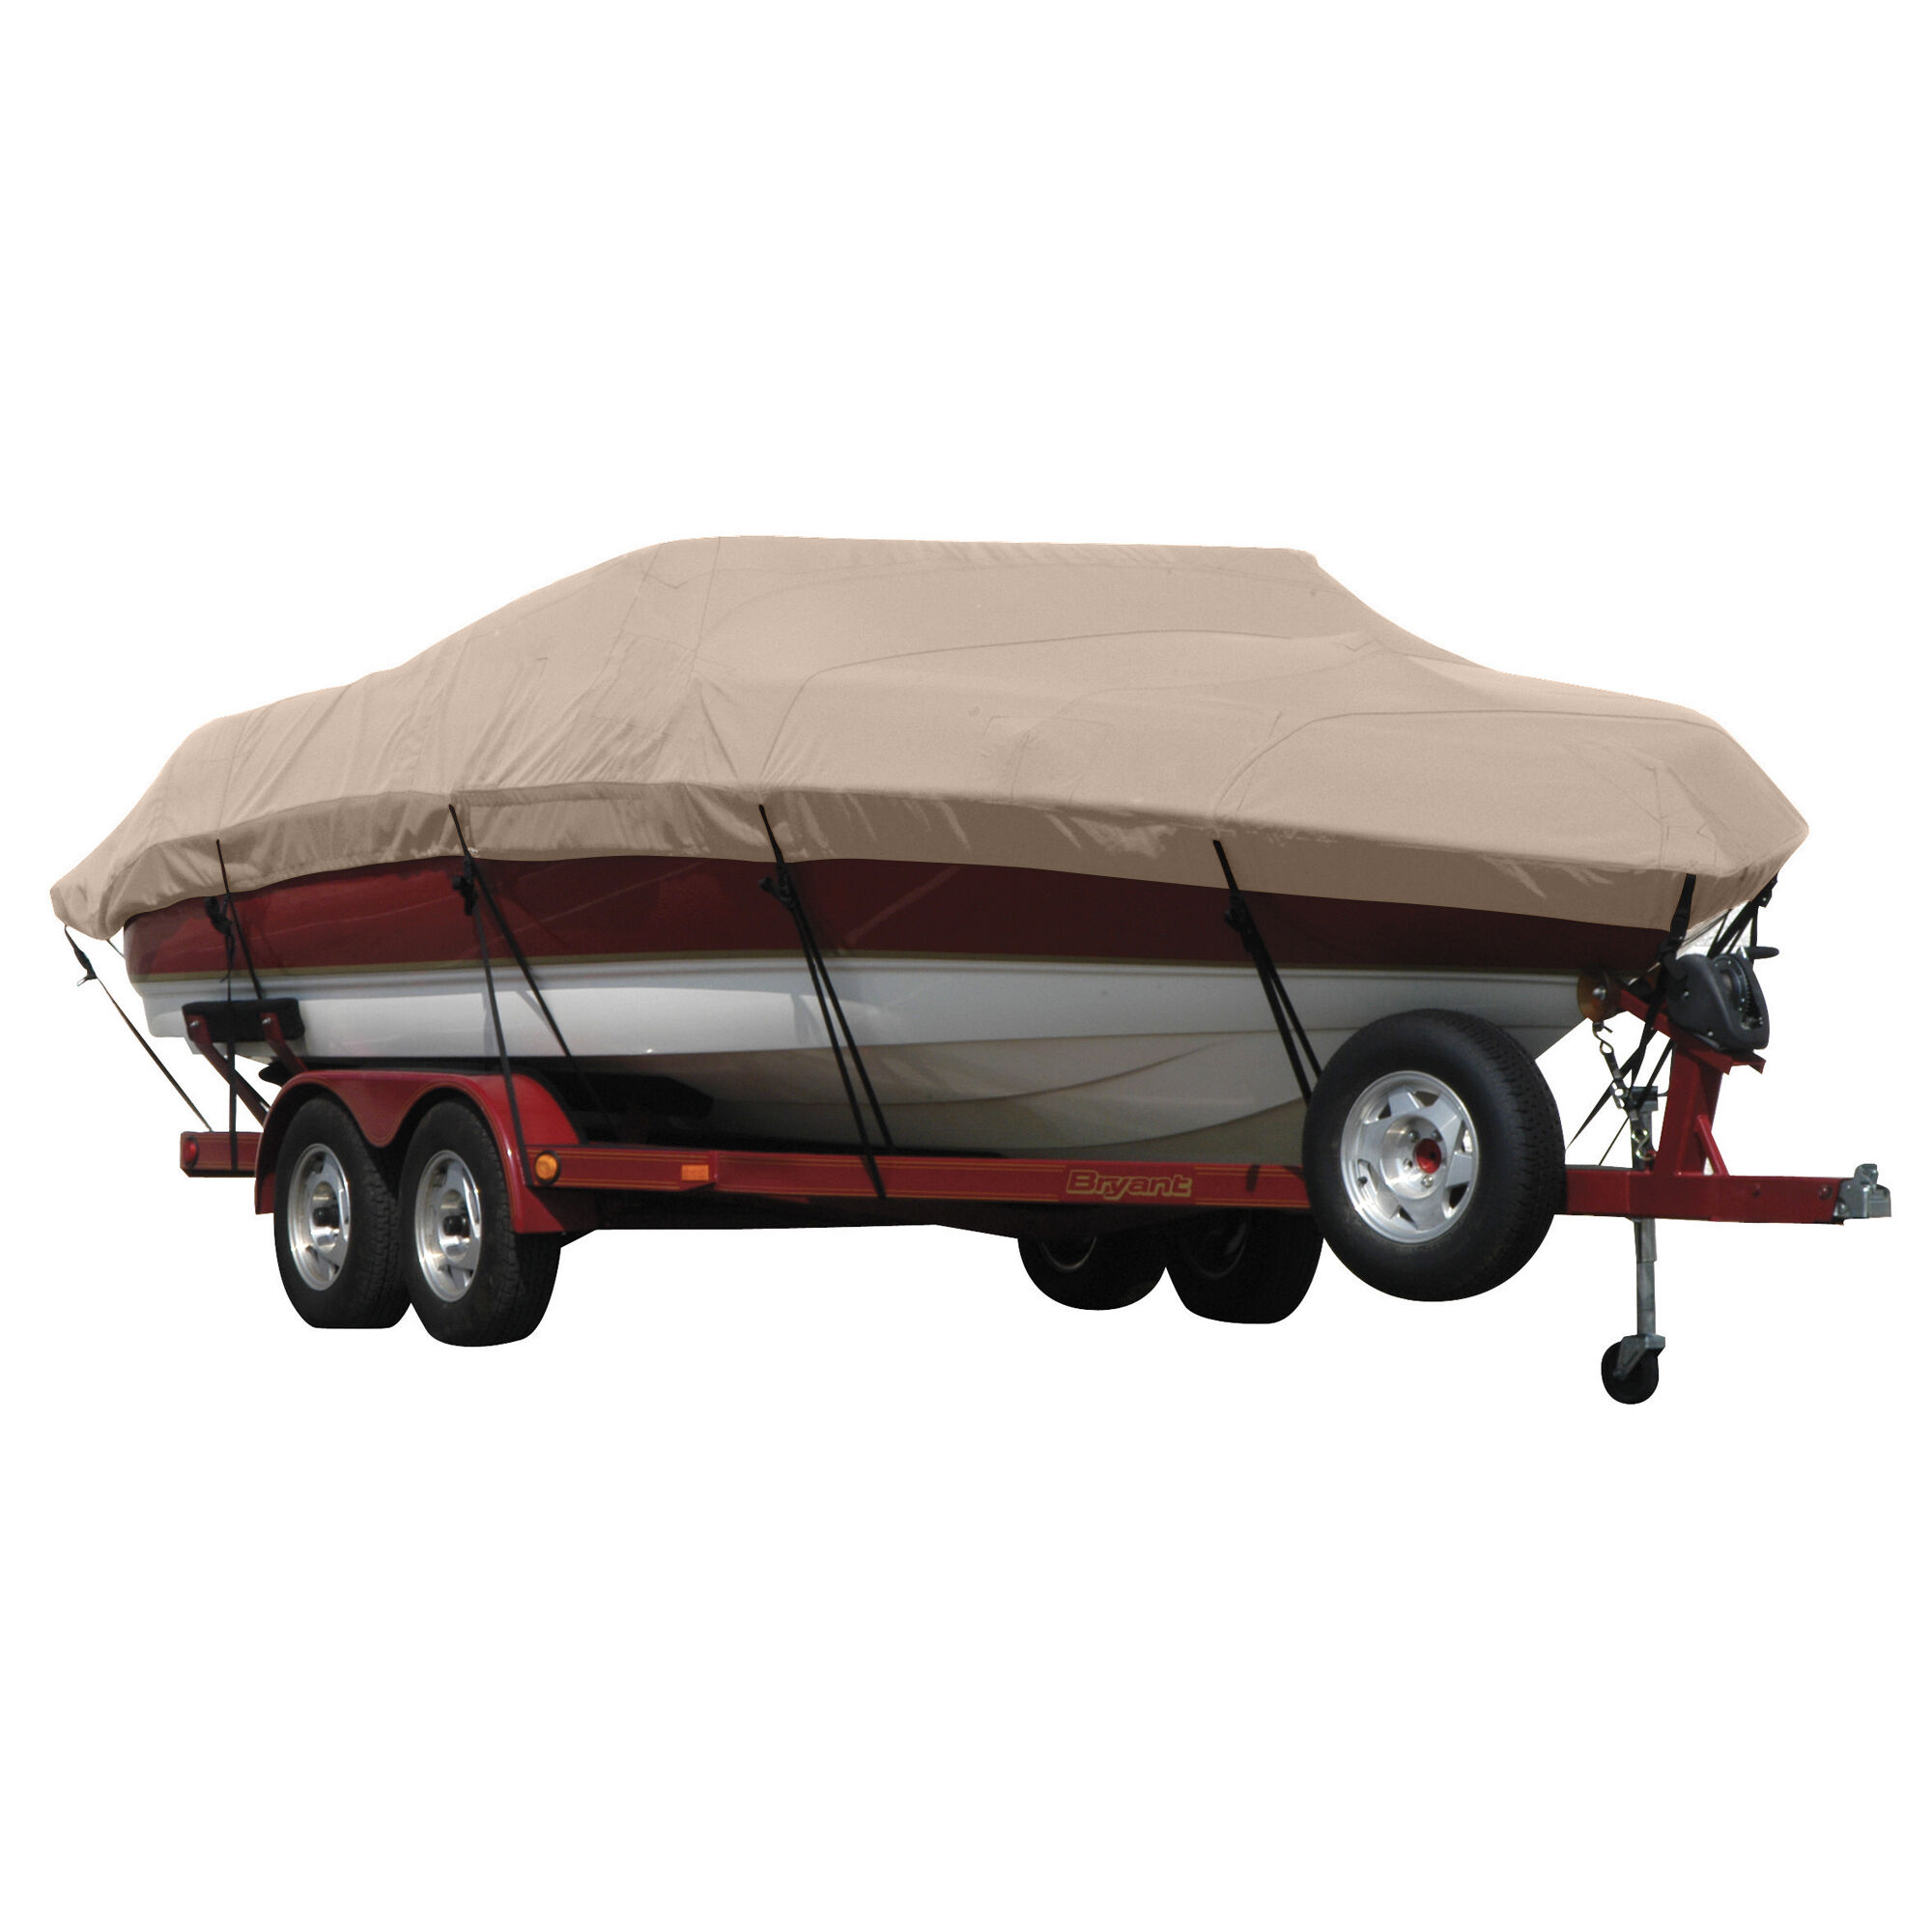 Covermate Exact Fit Sunbrella Boat Cover for Mariah 222 222 Br Bowrider I/O. Linnen in Linen